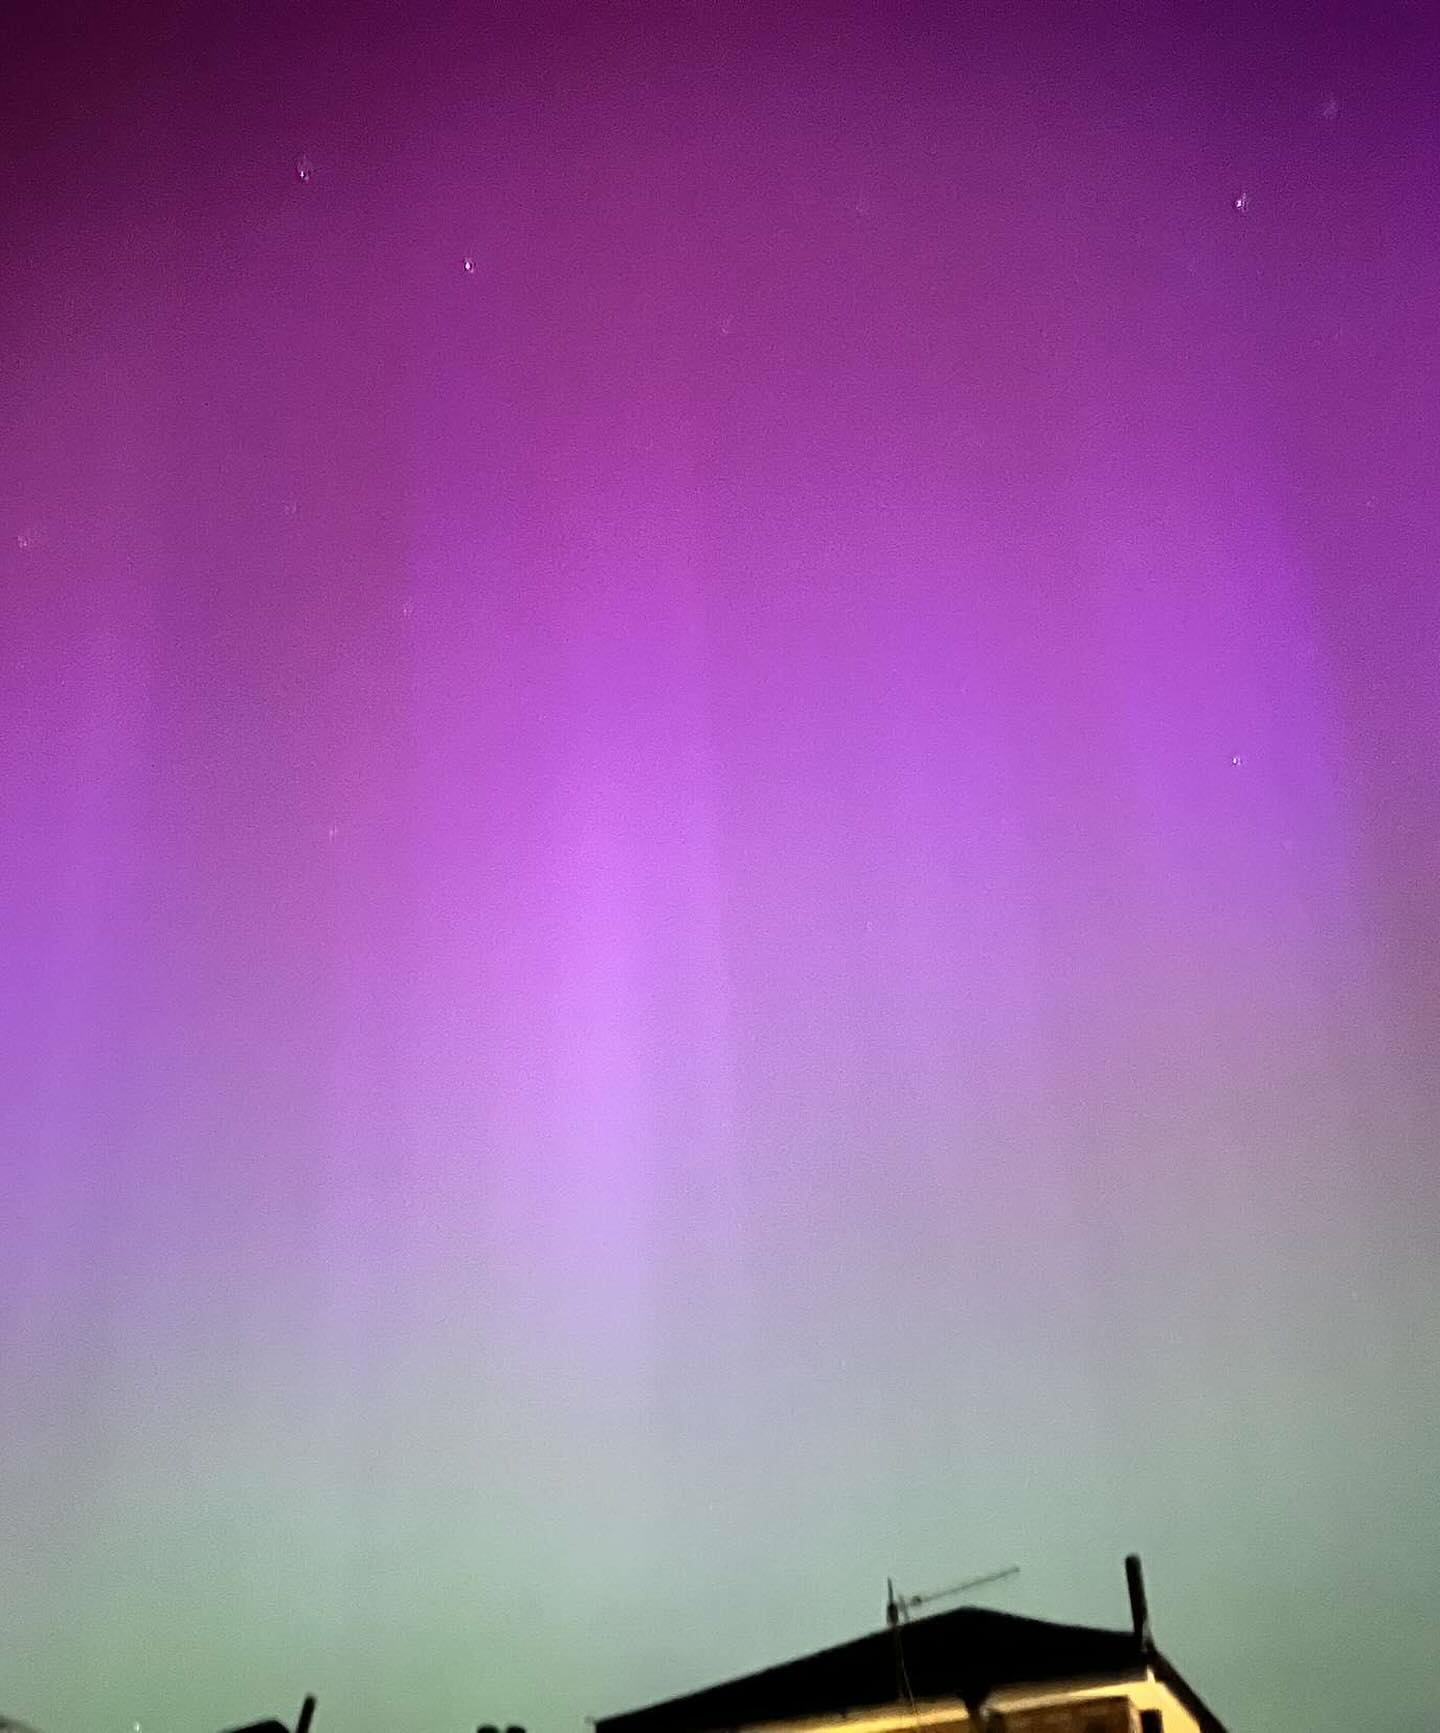 Had to screen record my camera to see this! Can’t believe we had the chance to see this where I am 🔥 #aurora #auroraborealis #northernlights #nightphotography #nightsky